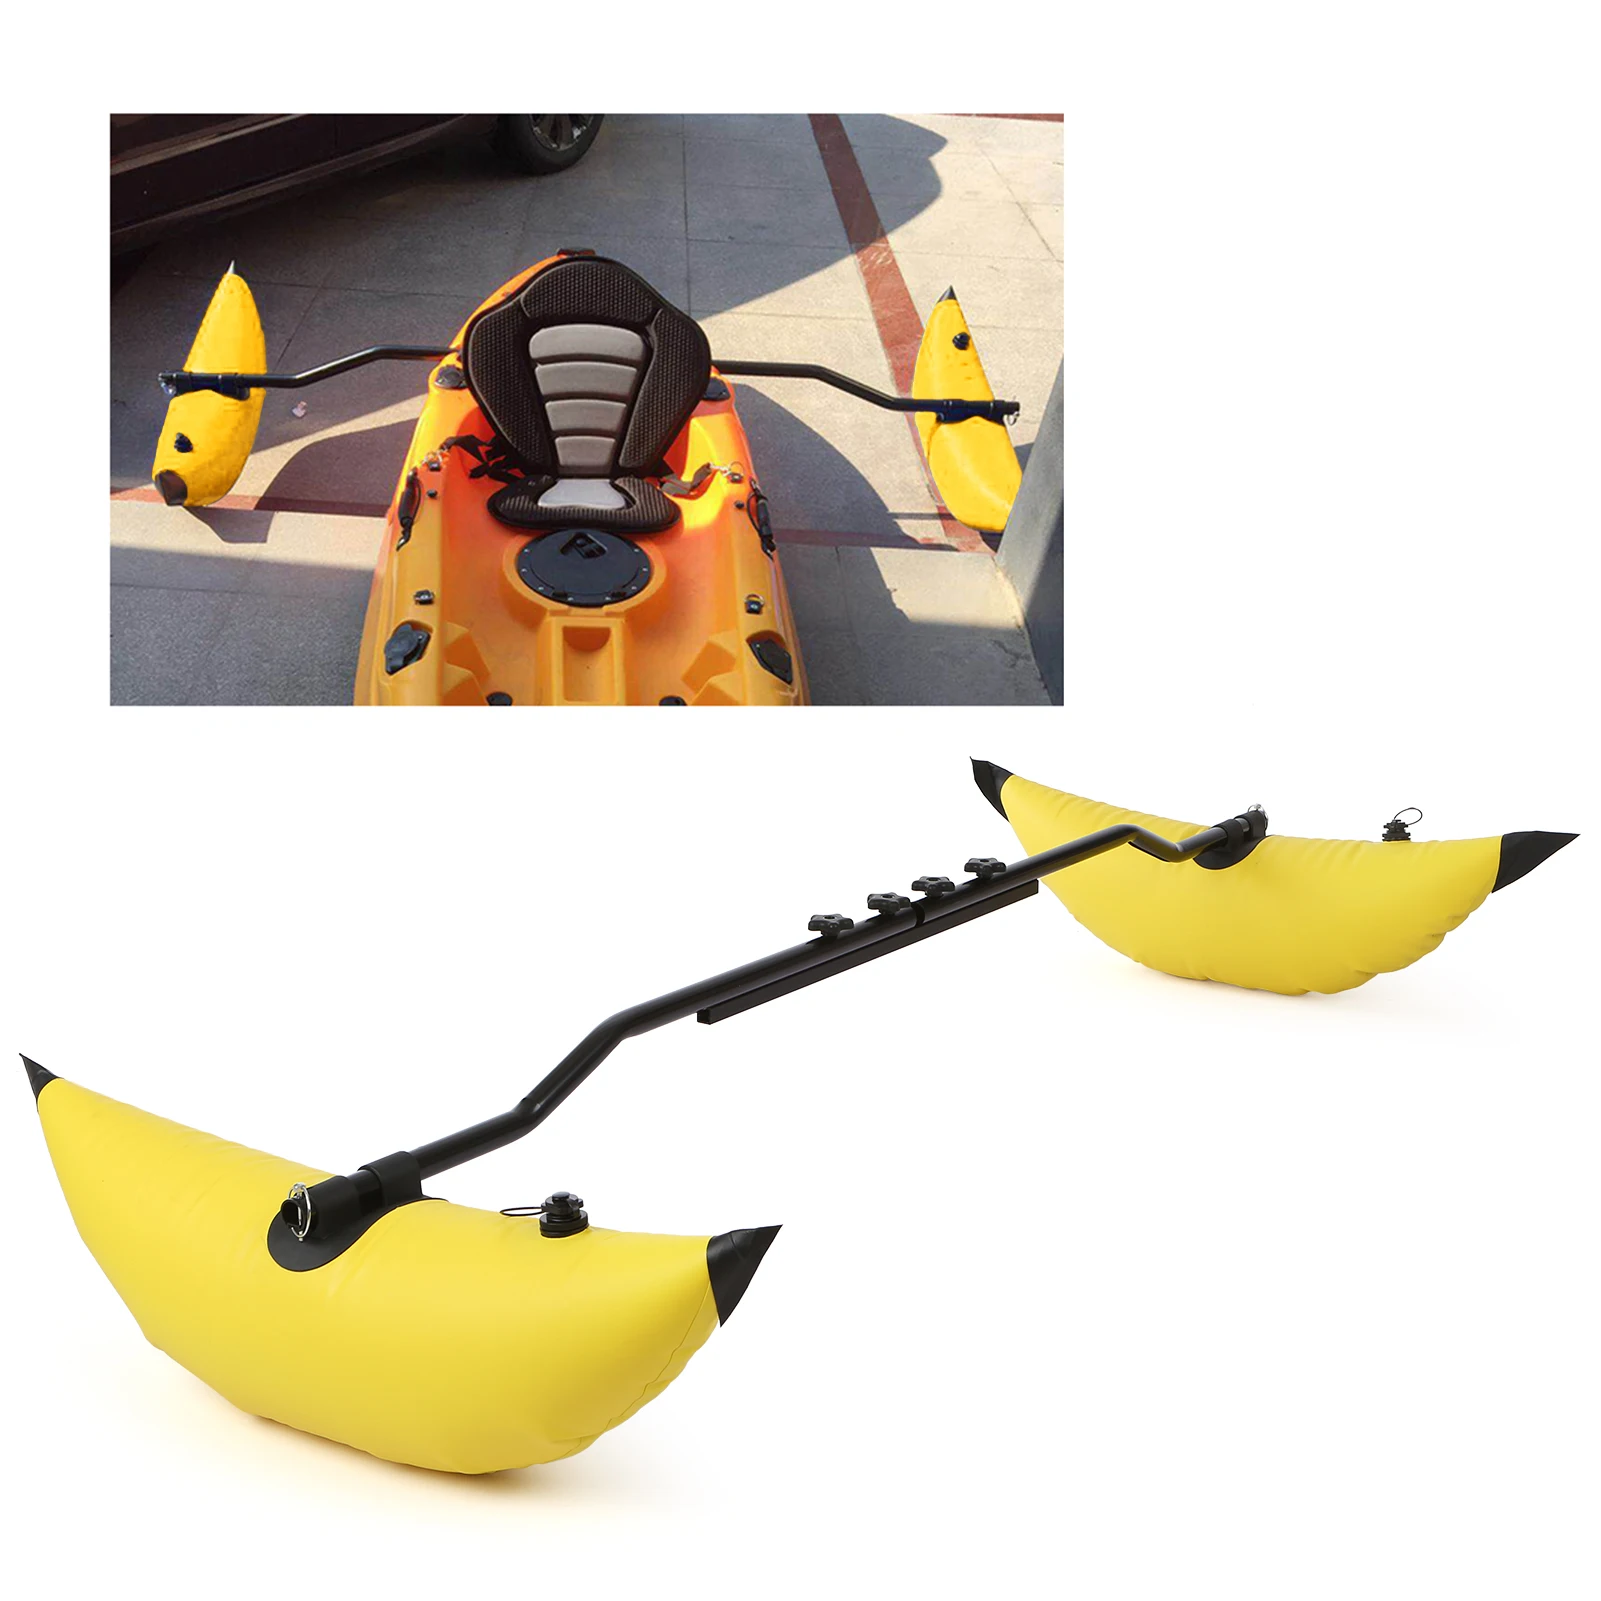 2022 New Kayak PVC Inflatable Outrigger Float with Sidekick Arms Rod Boat Fishing Standing Float Stabilizer System Kit